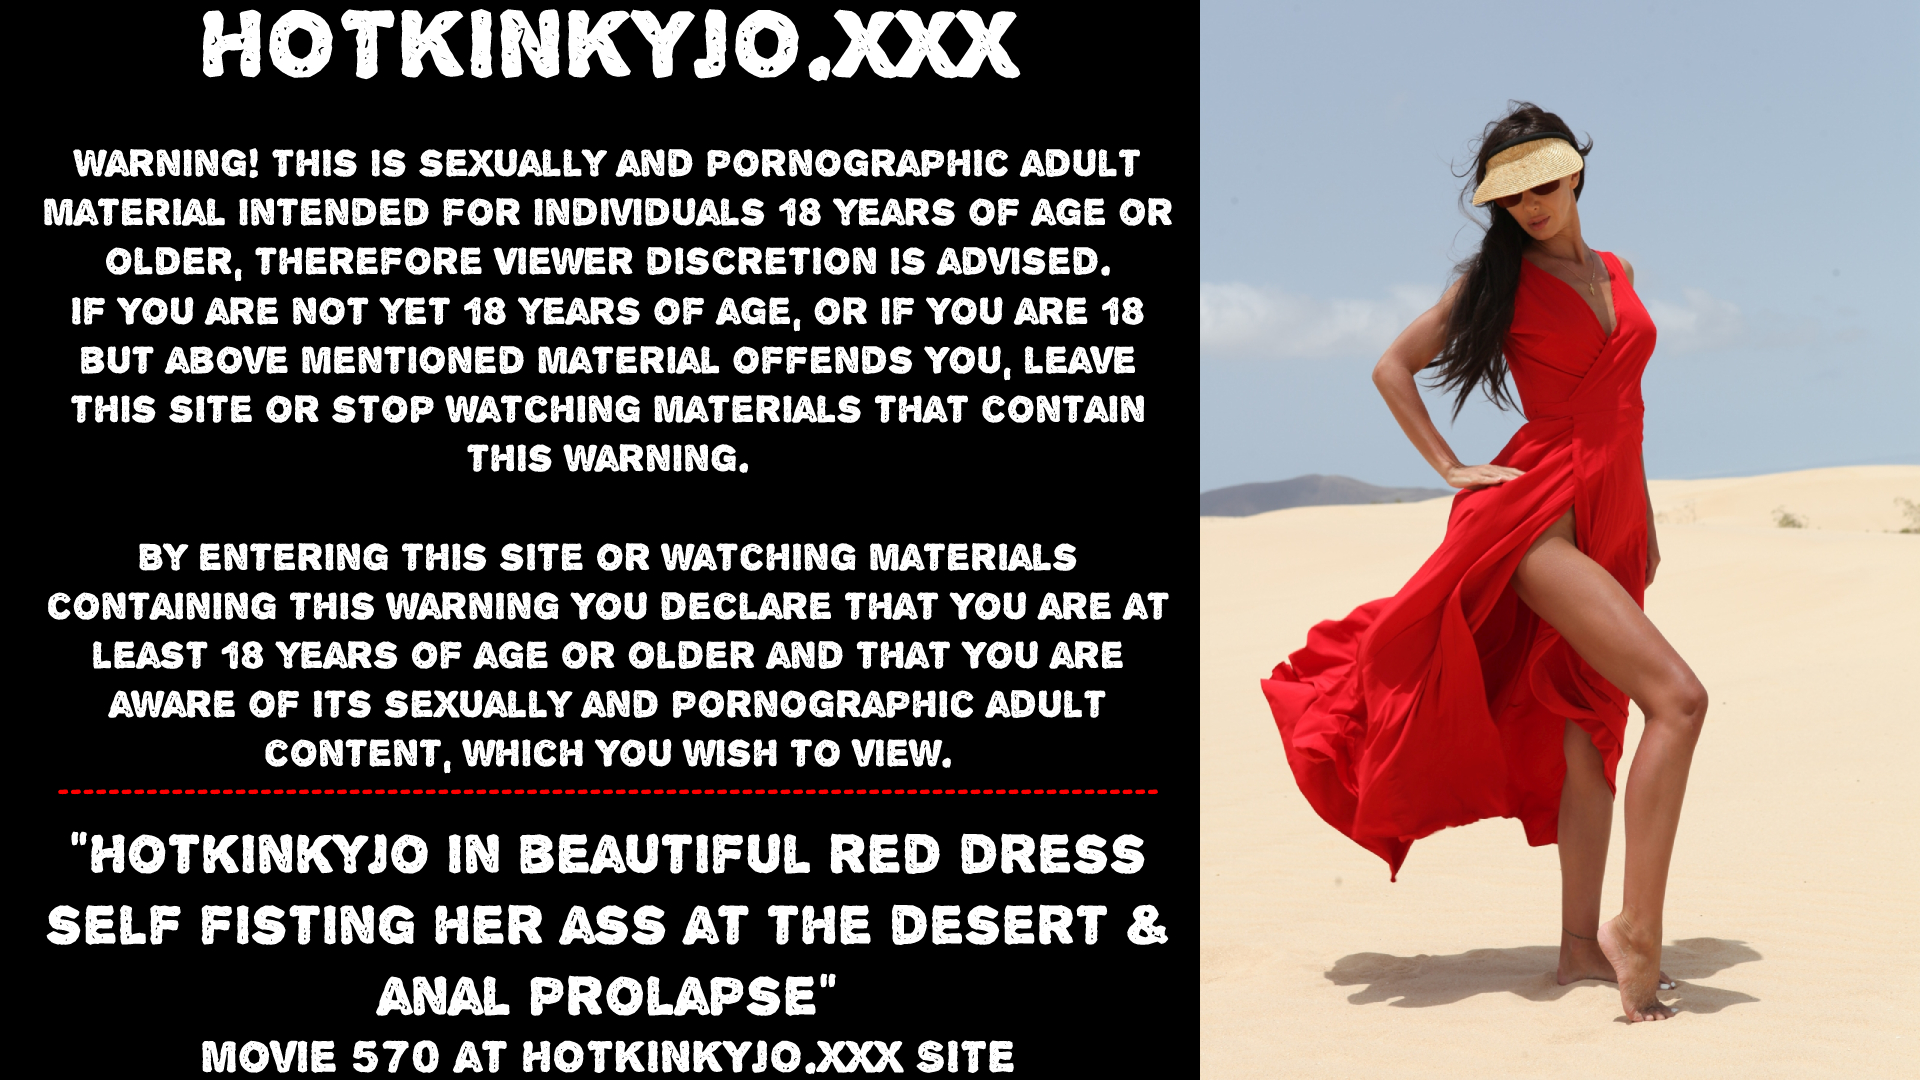 Hotkinkyjo in beautiful red dress self fisting her ass